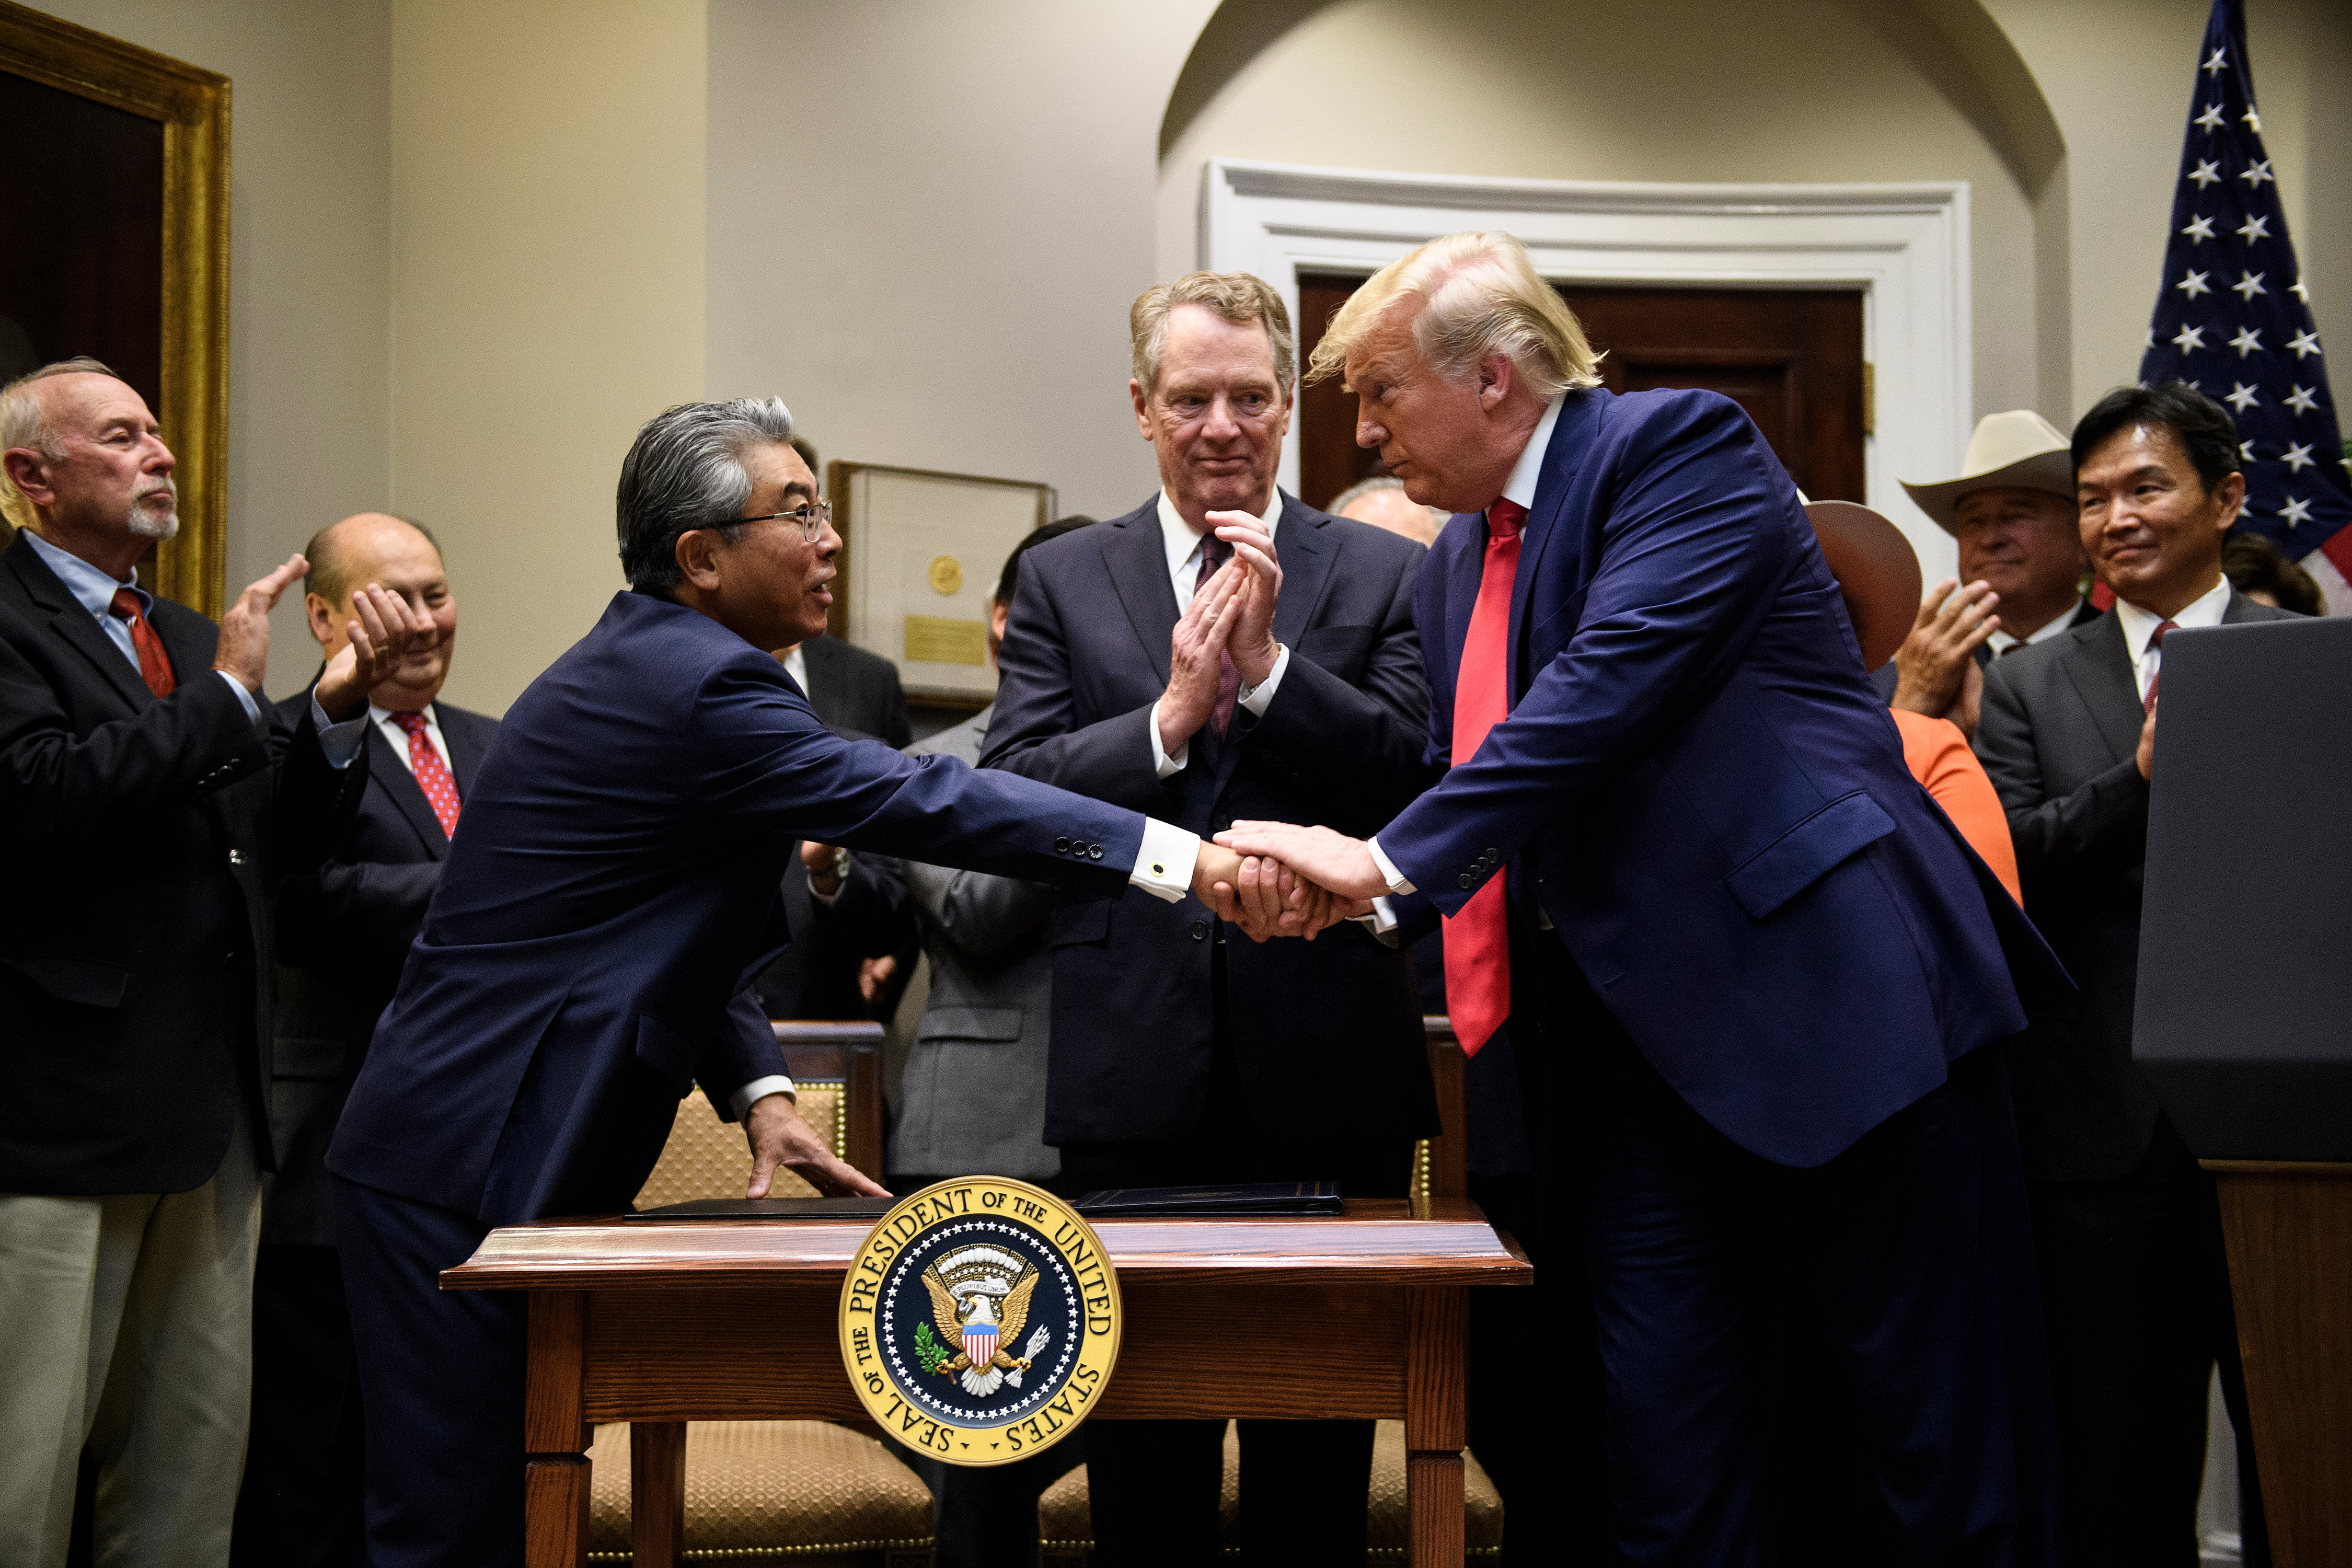 US Trade Representative Robert Lighthizer (C) watches as US President Donald Trump shakes the hand of Japan's US Ambassador Shinsuke Sugiyama (L) during a signing ceremony of a US-Japanese trade agreement in the Roosevelt Room of the White House October 7, 2019, in Washington, DC. (Photo by BRENDAN SMIALOWSKI/AFP via Getty Images)